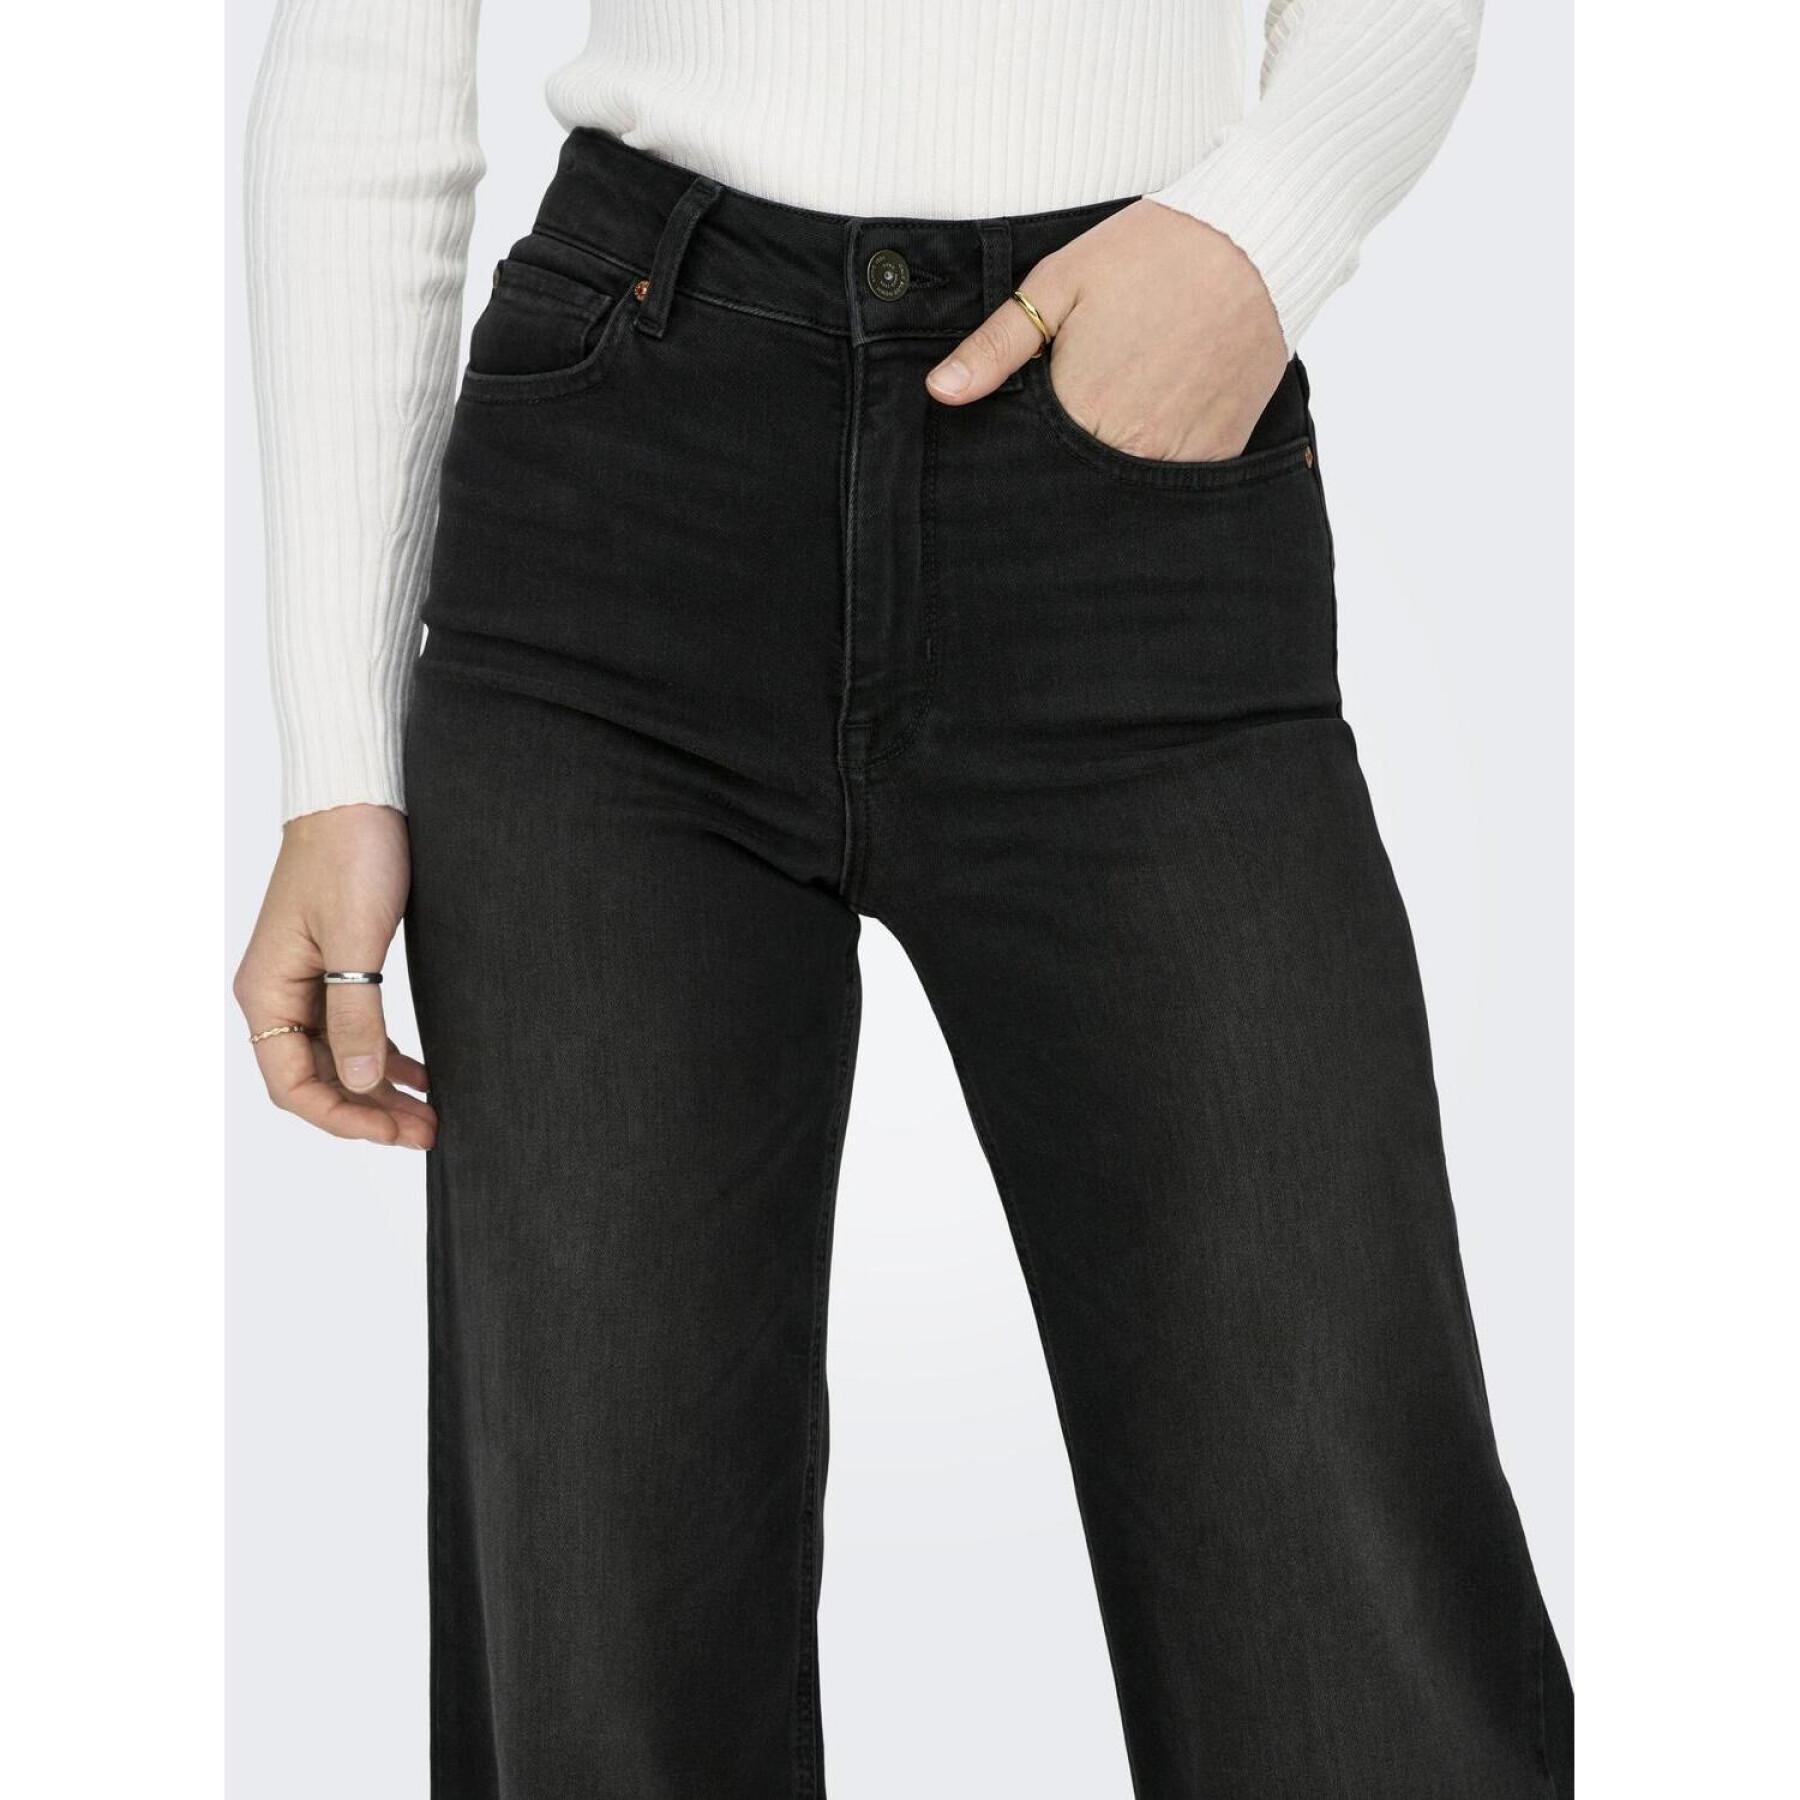 Weite Jeans mit hoher Taille Frau Only Madison